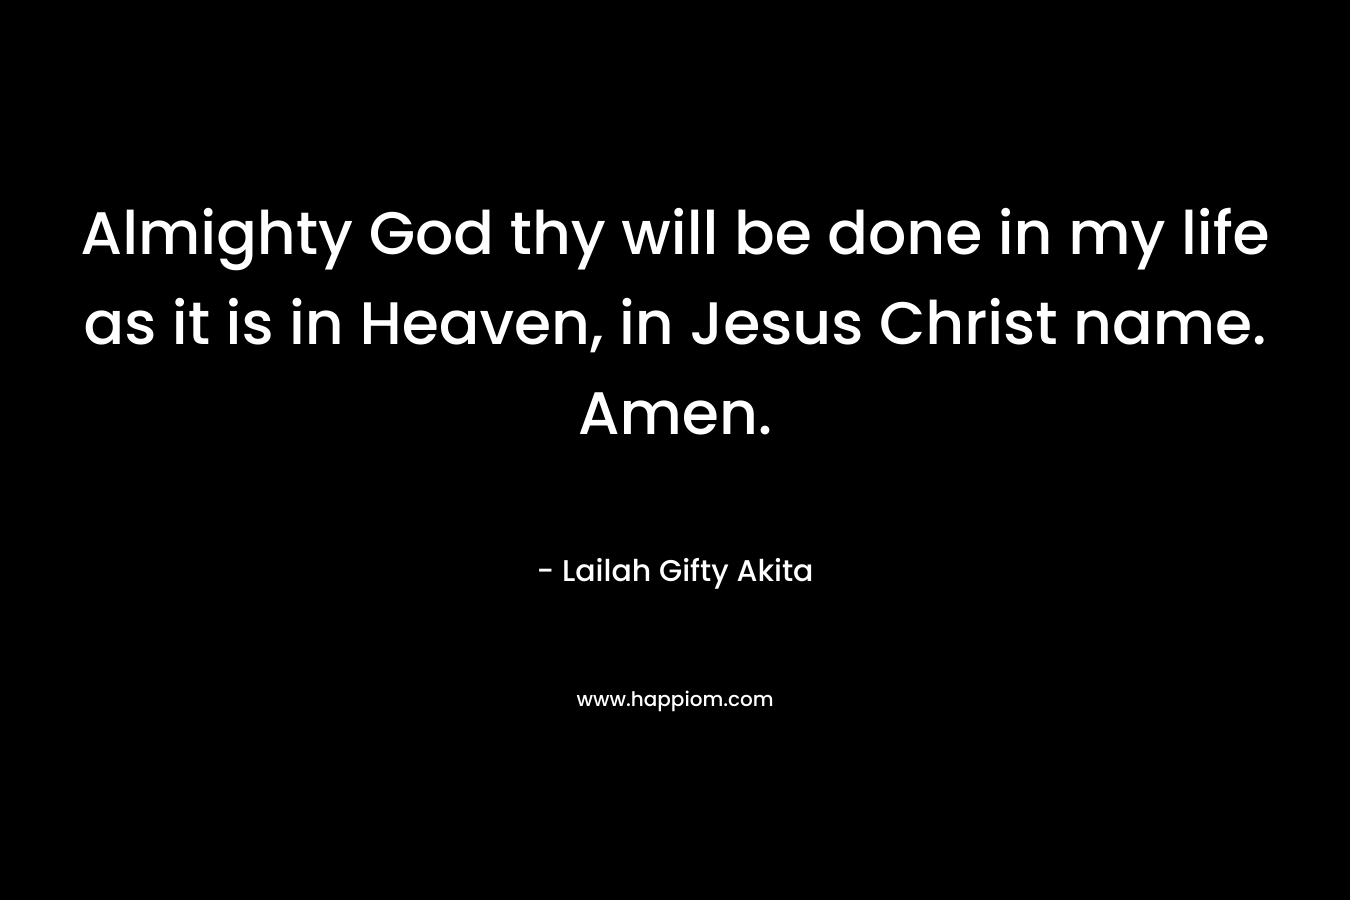 Almighty God thy will be done in my life as it is in Heaven, in Jesus Christ name. Amen.